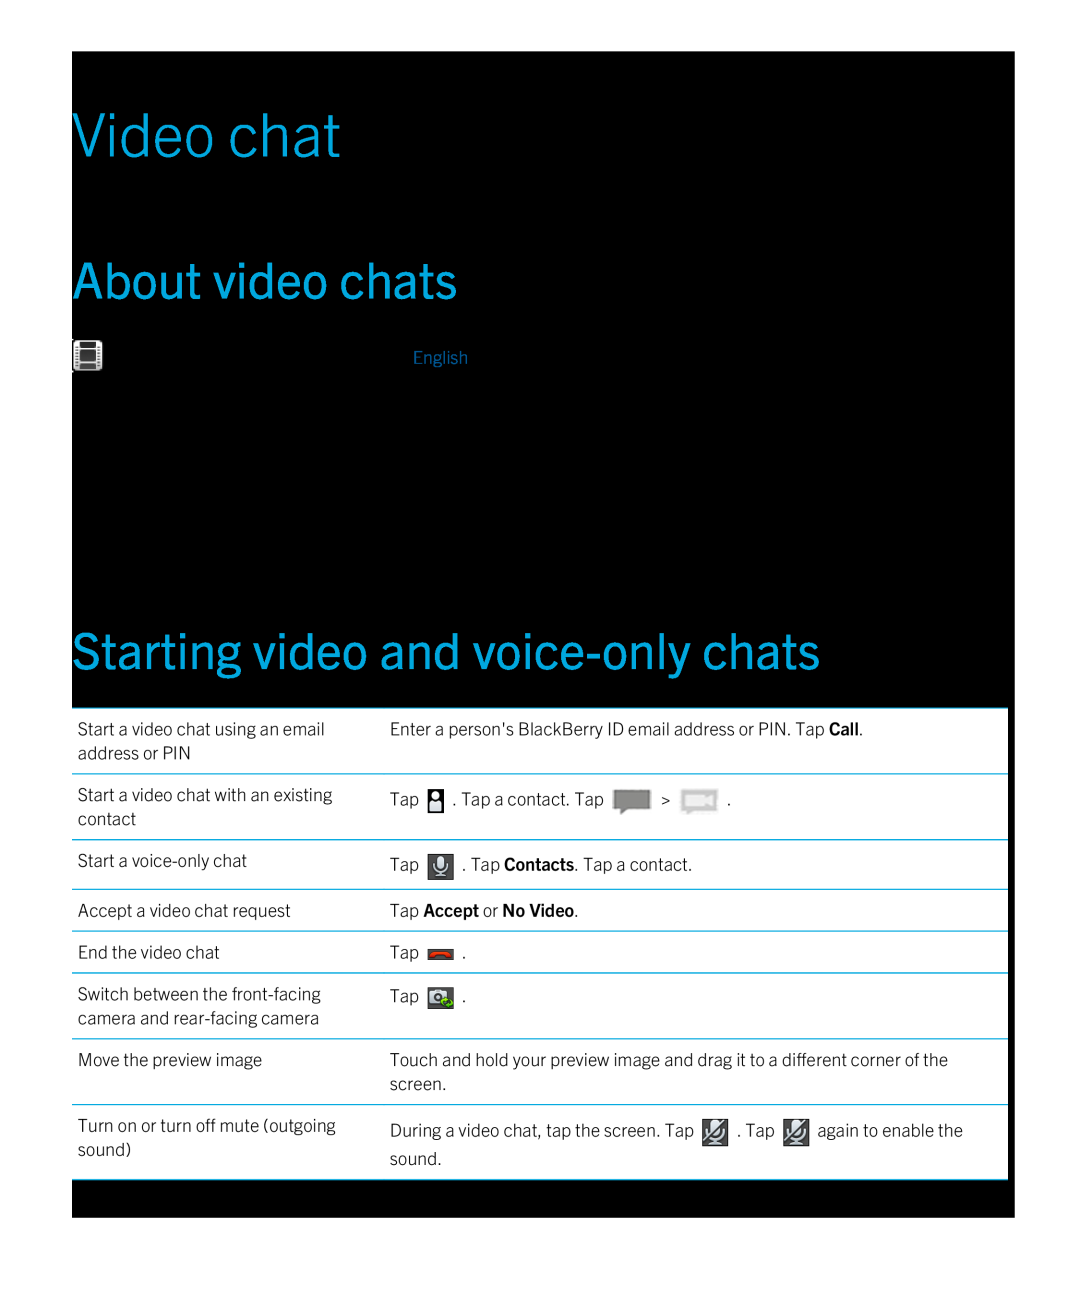 Blackberry 2.0.1 manual Video chat, About video chats, Starting video and voice-only chats, Tap Accept or No Video 